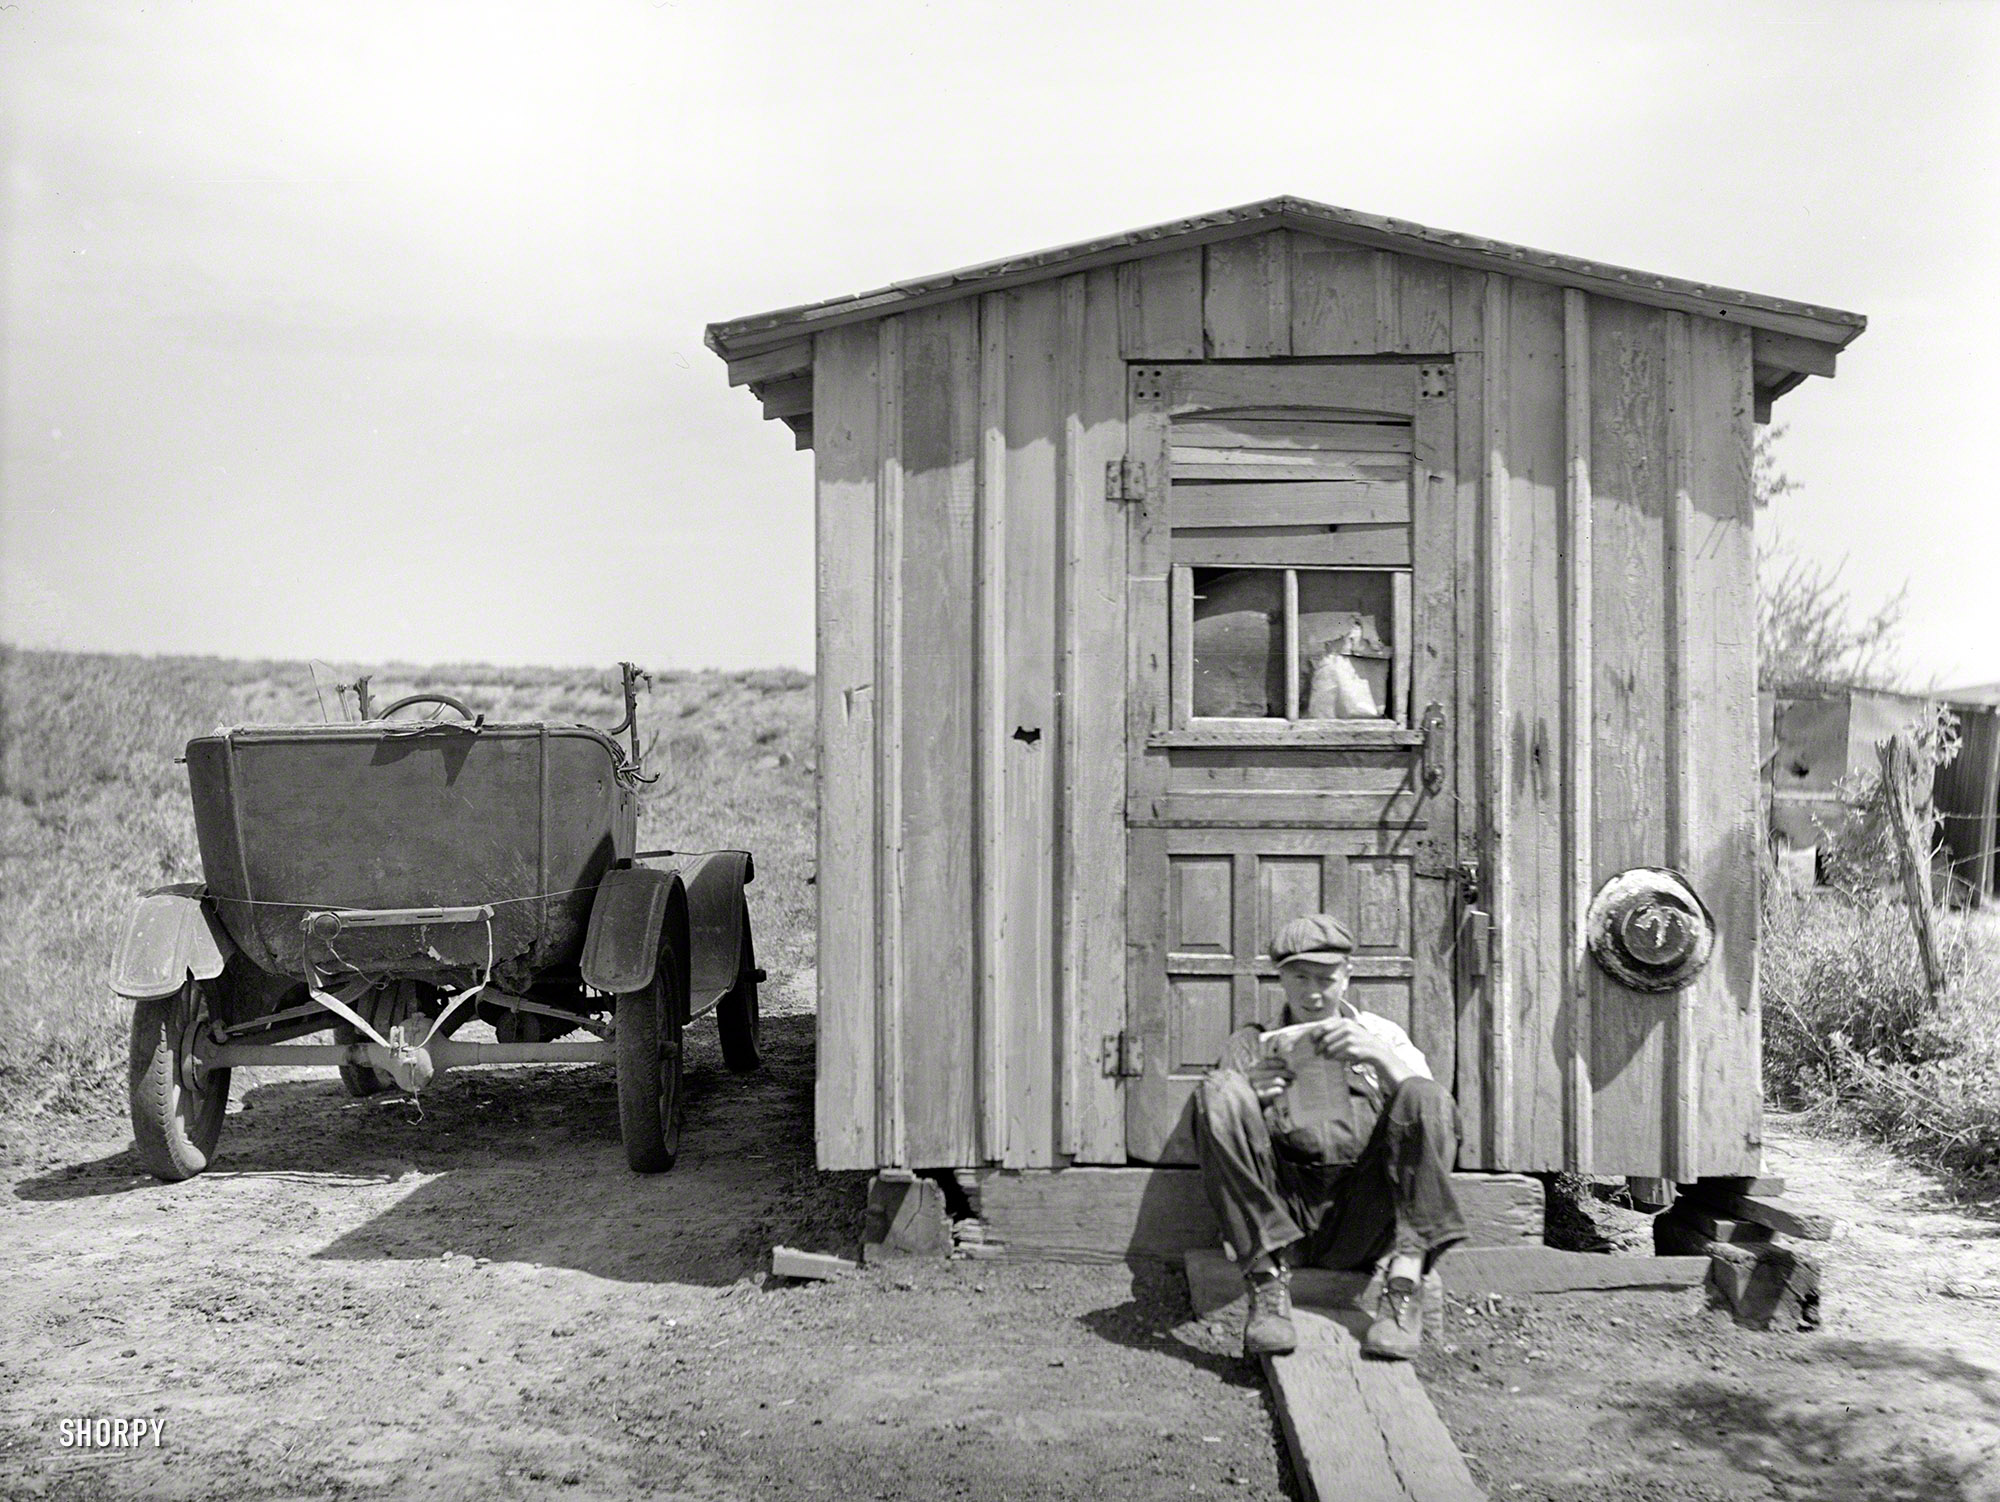 May 1936. "Home of worker in strip coal mine. Cherokee County, Kansas." Photo by Arthur Rothstein for the Resettlement Administration. View full size.